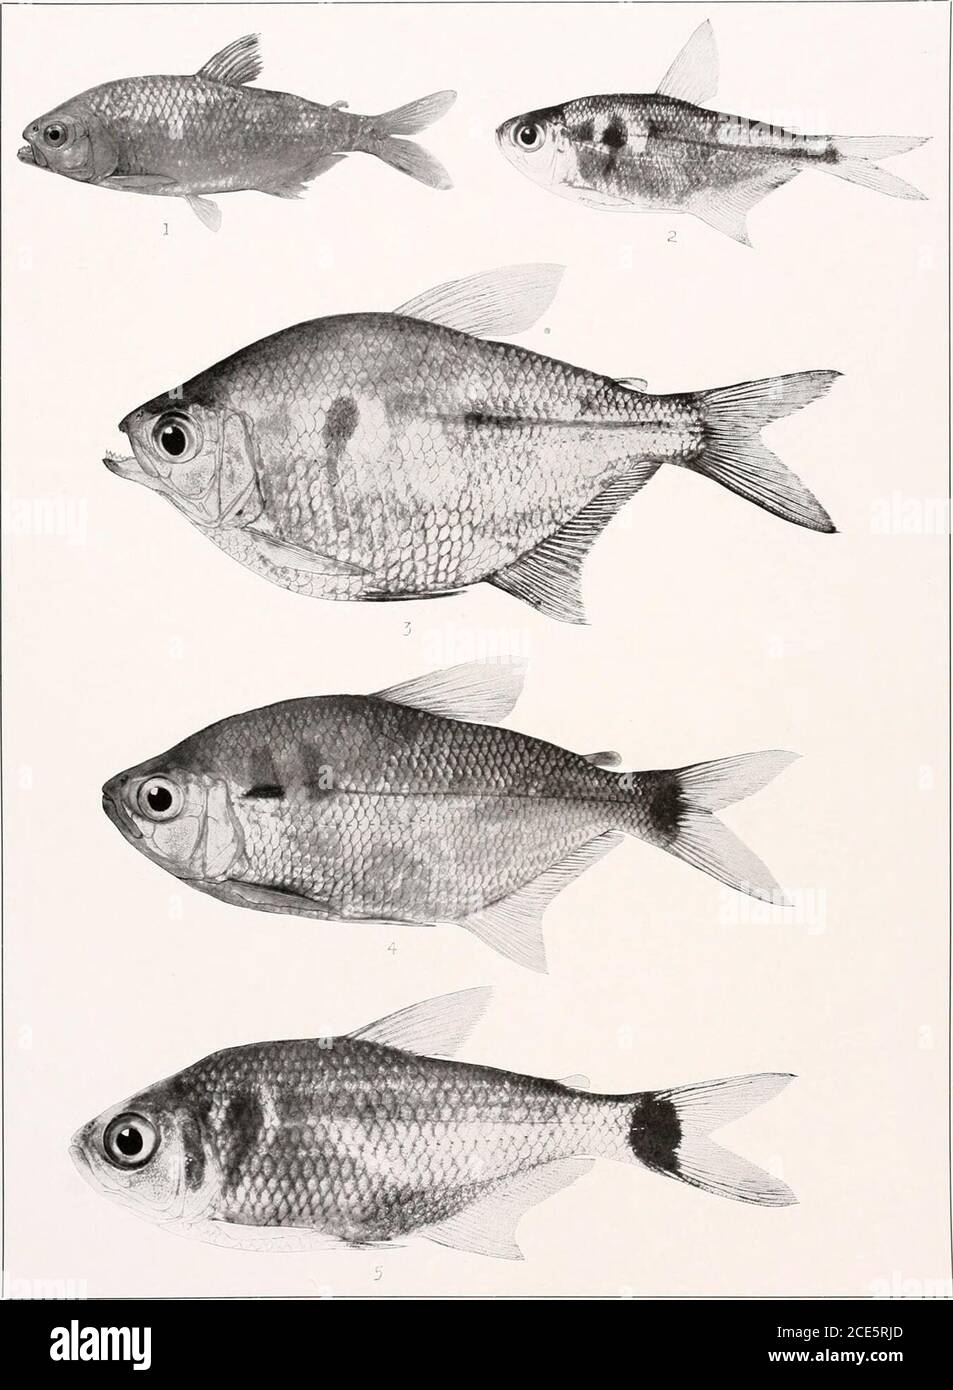 . The freshwater fishes of British Guiana, including a study of the ecological grouping of species and the relation of the fauna of the plateau to that of the lowlands . 1. Astyanax guianensis Eigenmann. (Type.) 54 mm. No. L013. 2. Astyanax essequibensis Eigen-mann. (Type.) 53 mm. No. 1018. 3. Astyanax initiator Eigenmann. (Type.) 53 mm. Xo. 102:-!.4. Astyanax mucronatus Eigenmann. (Type.) 53 nun. No. 1025. Memuirs Carnegie Museum, Vol. v. Plate LI!. 1. Astyanax wappi (Cuvier and Valenciennes). From specimens in British Museum. 2. Pcecilurichthyspolylepis (Gtjnther). 50 nun. No. 1419a. 3. Pcec Stock Photo